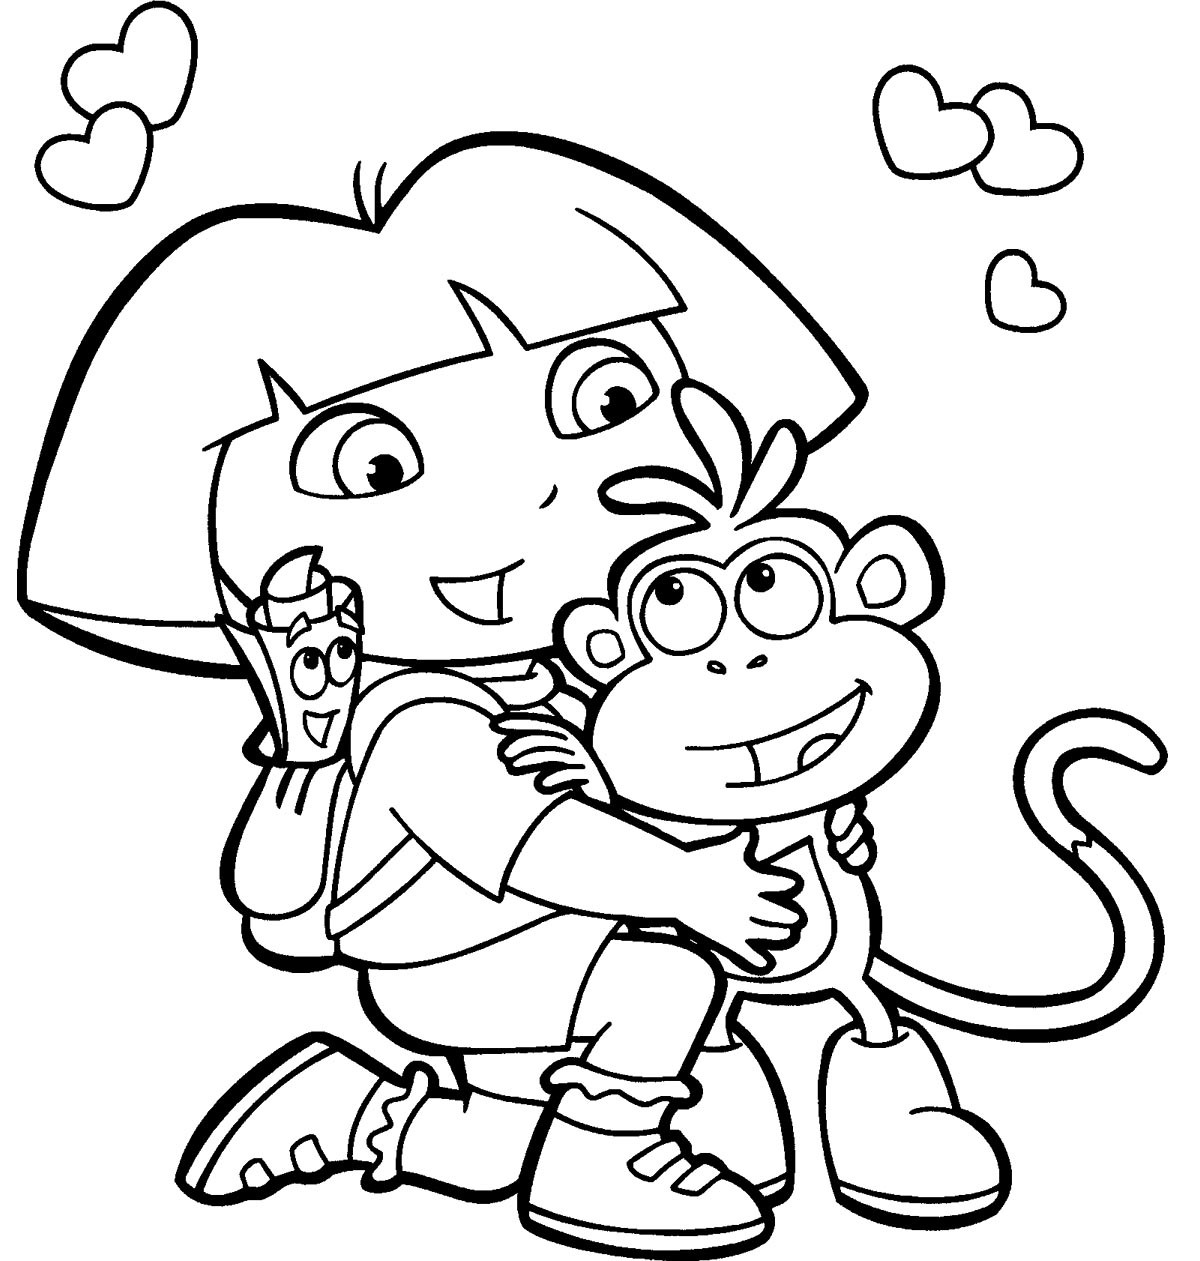 Dora Printable Coloring Pages
 dora coloring pages